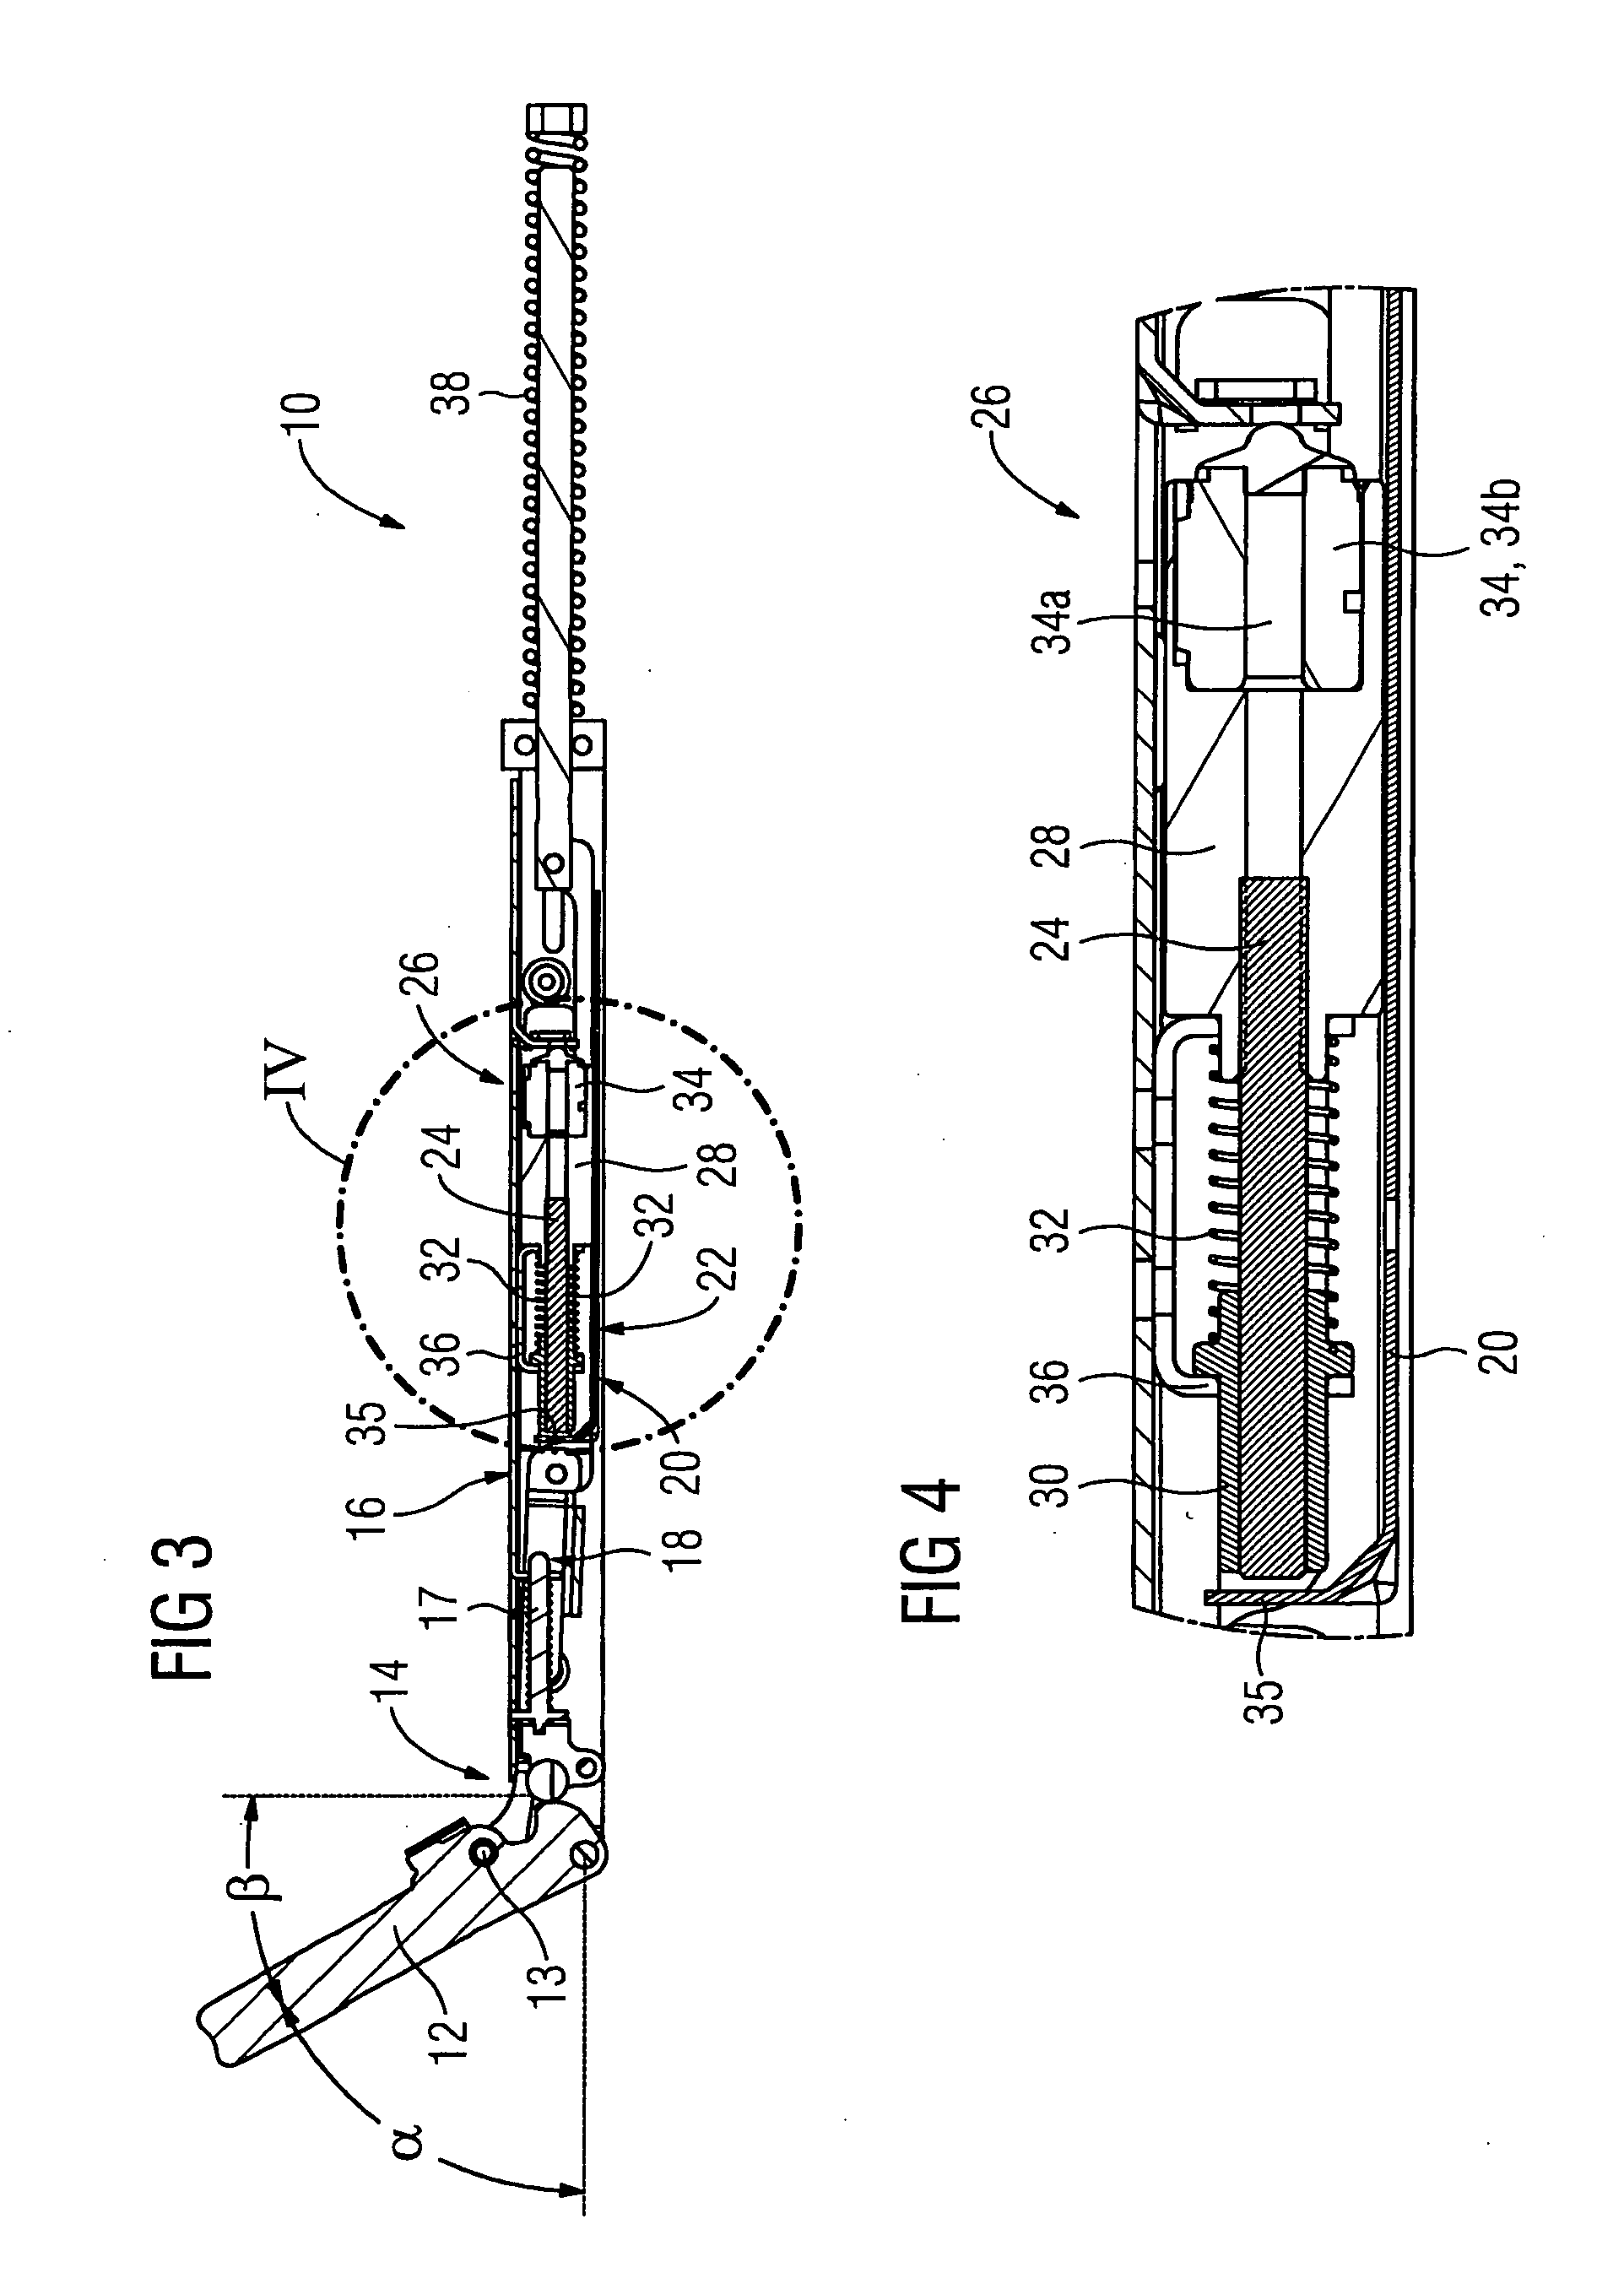 Oven door opening and closing device